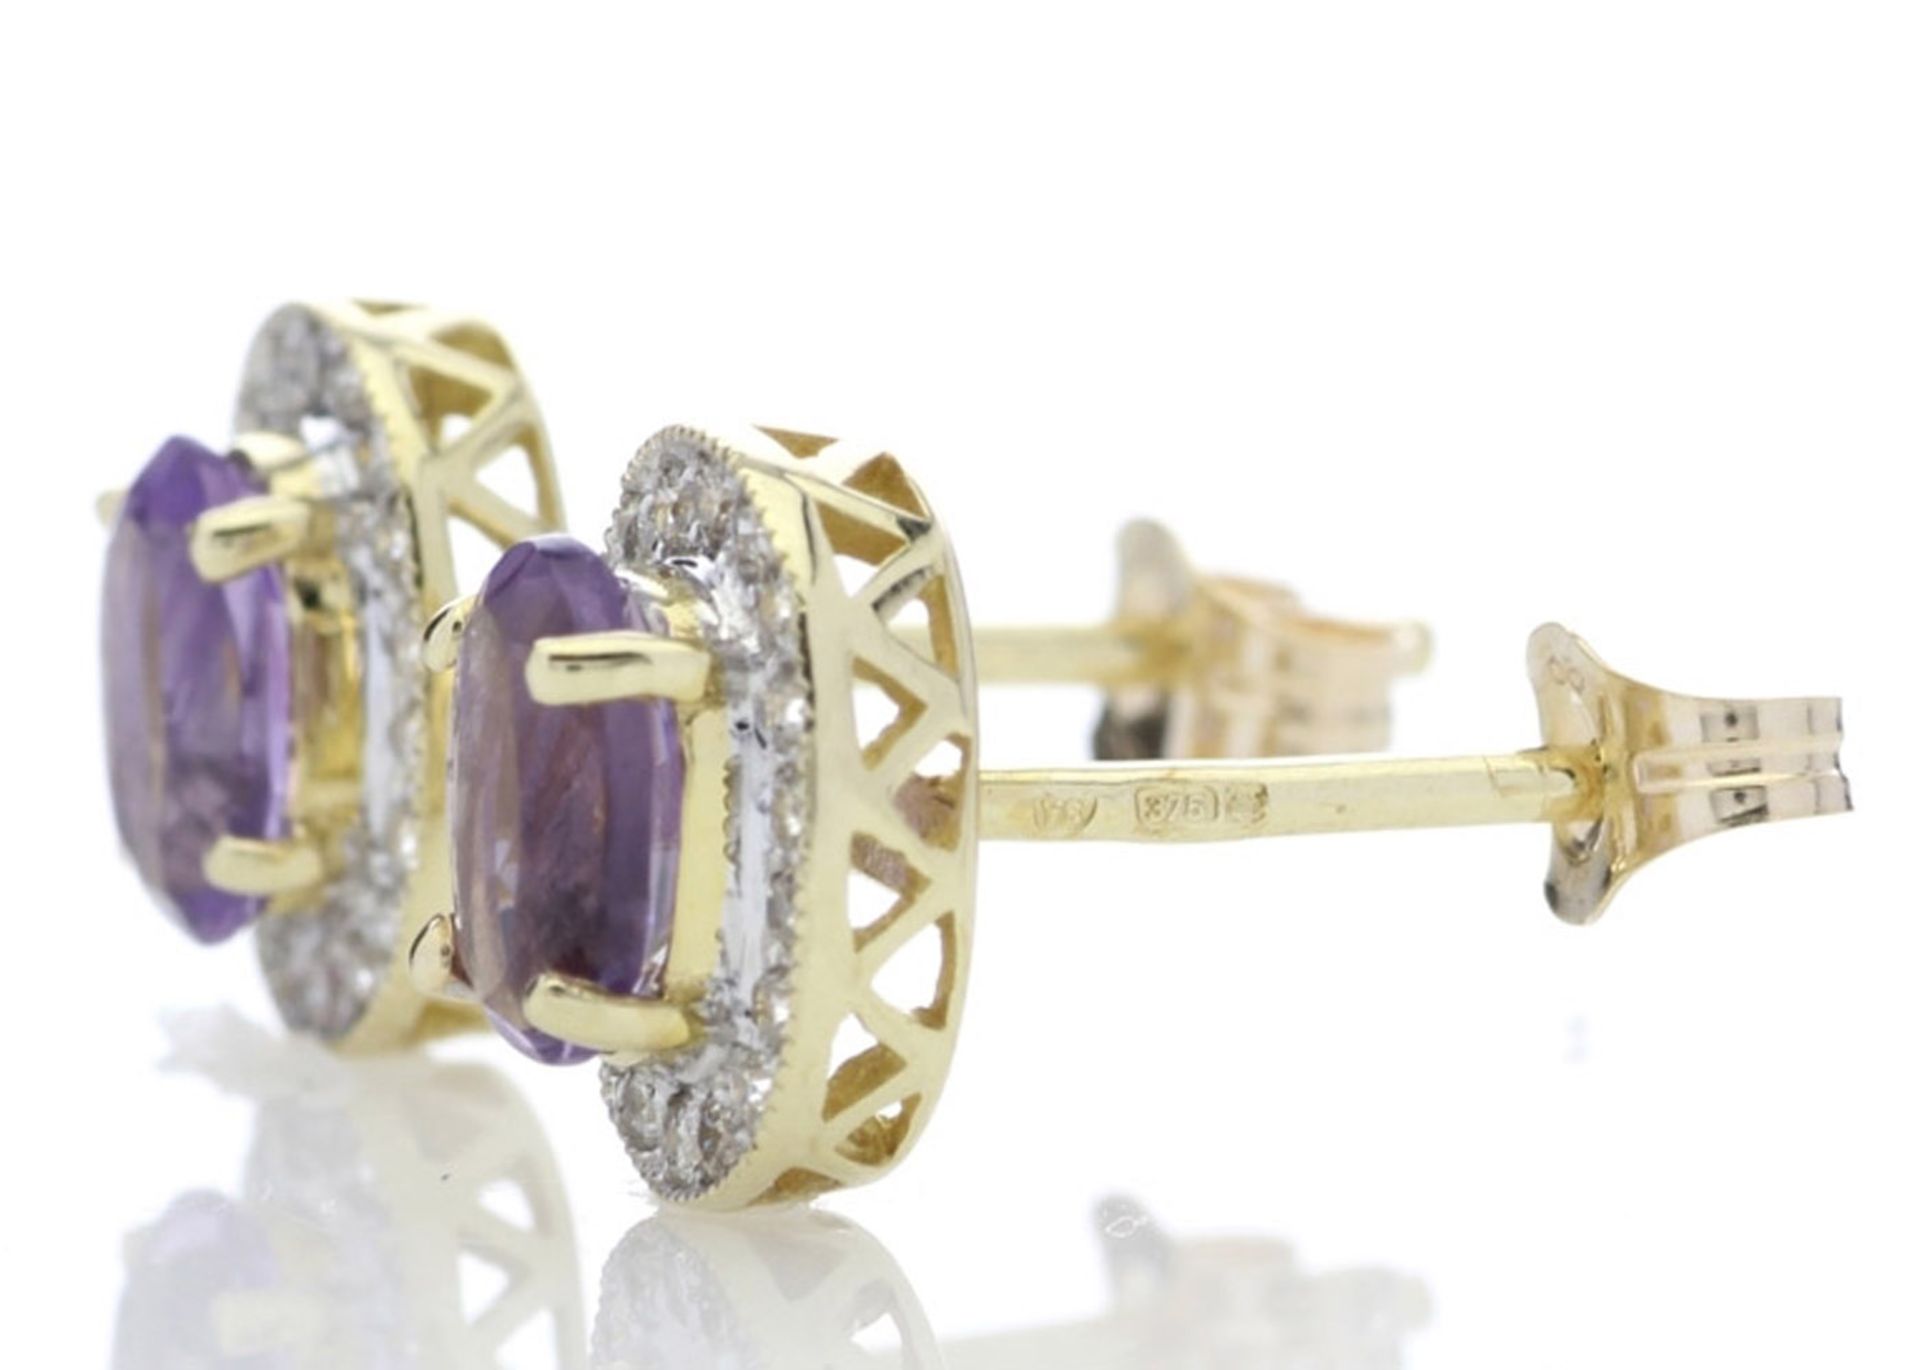 9ct Yellow Gold Amethyst and Diamond Cluster Earring (A0.86) 0.18 Carats - Valued By GIE £2,855.00 - - Image 6 of 7